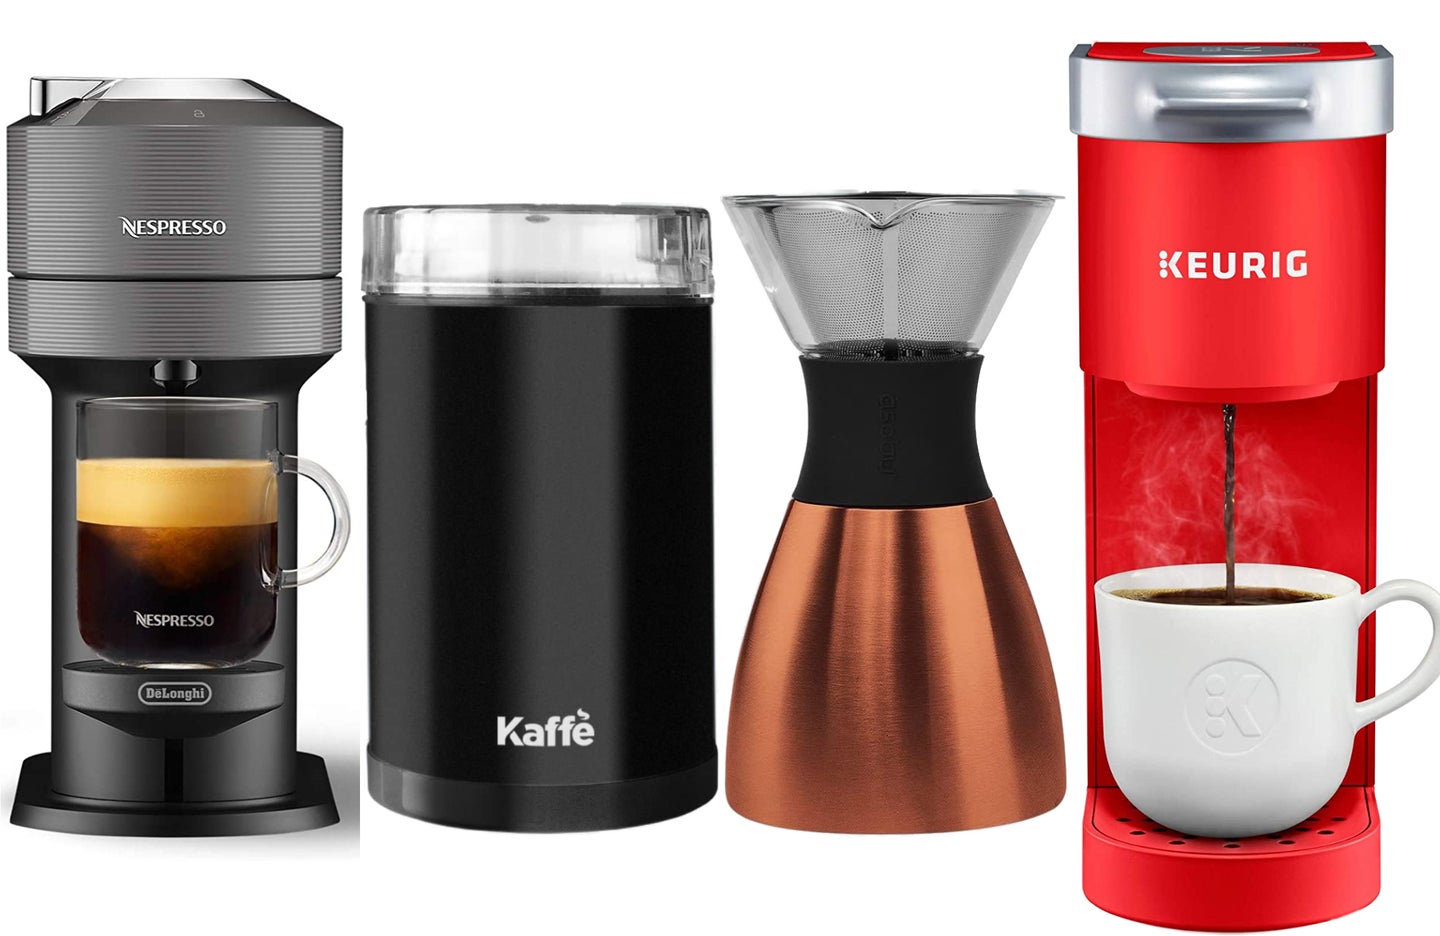 The best Black Friday coffee deals